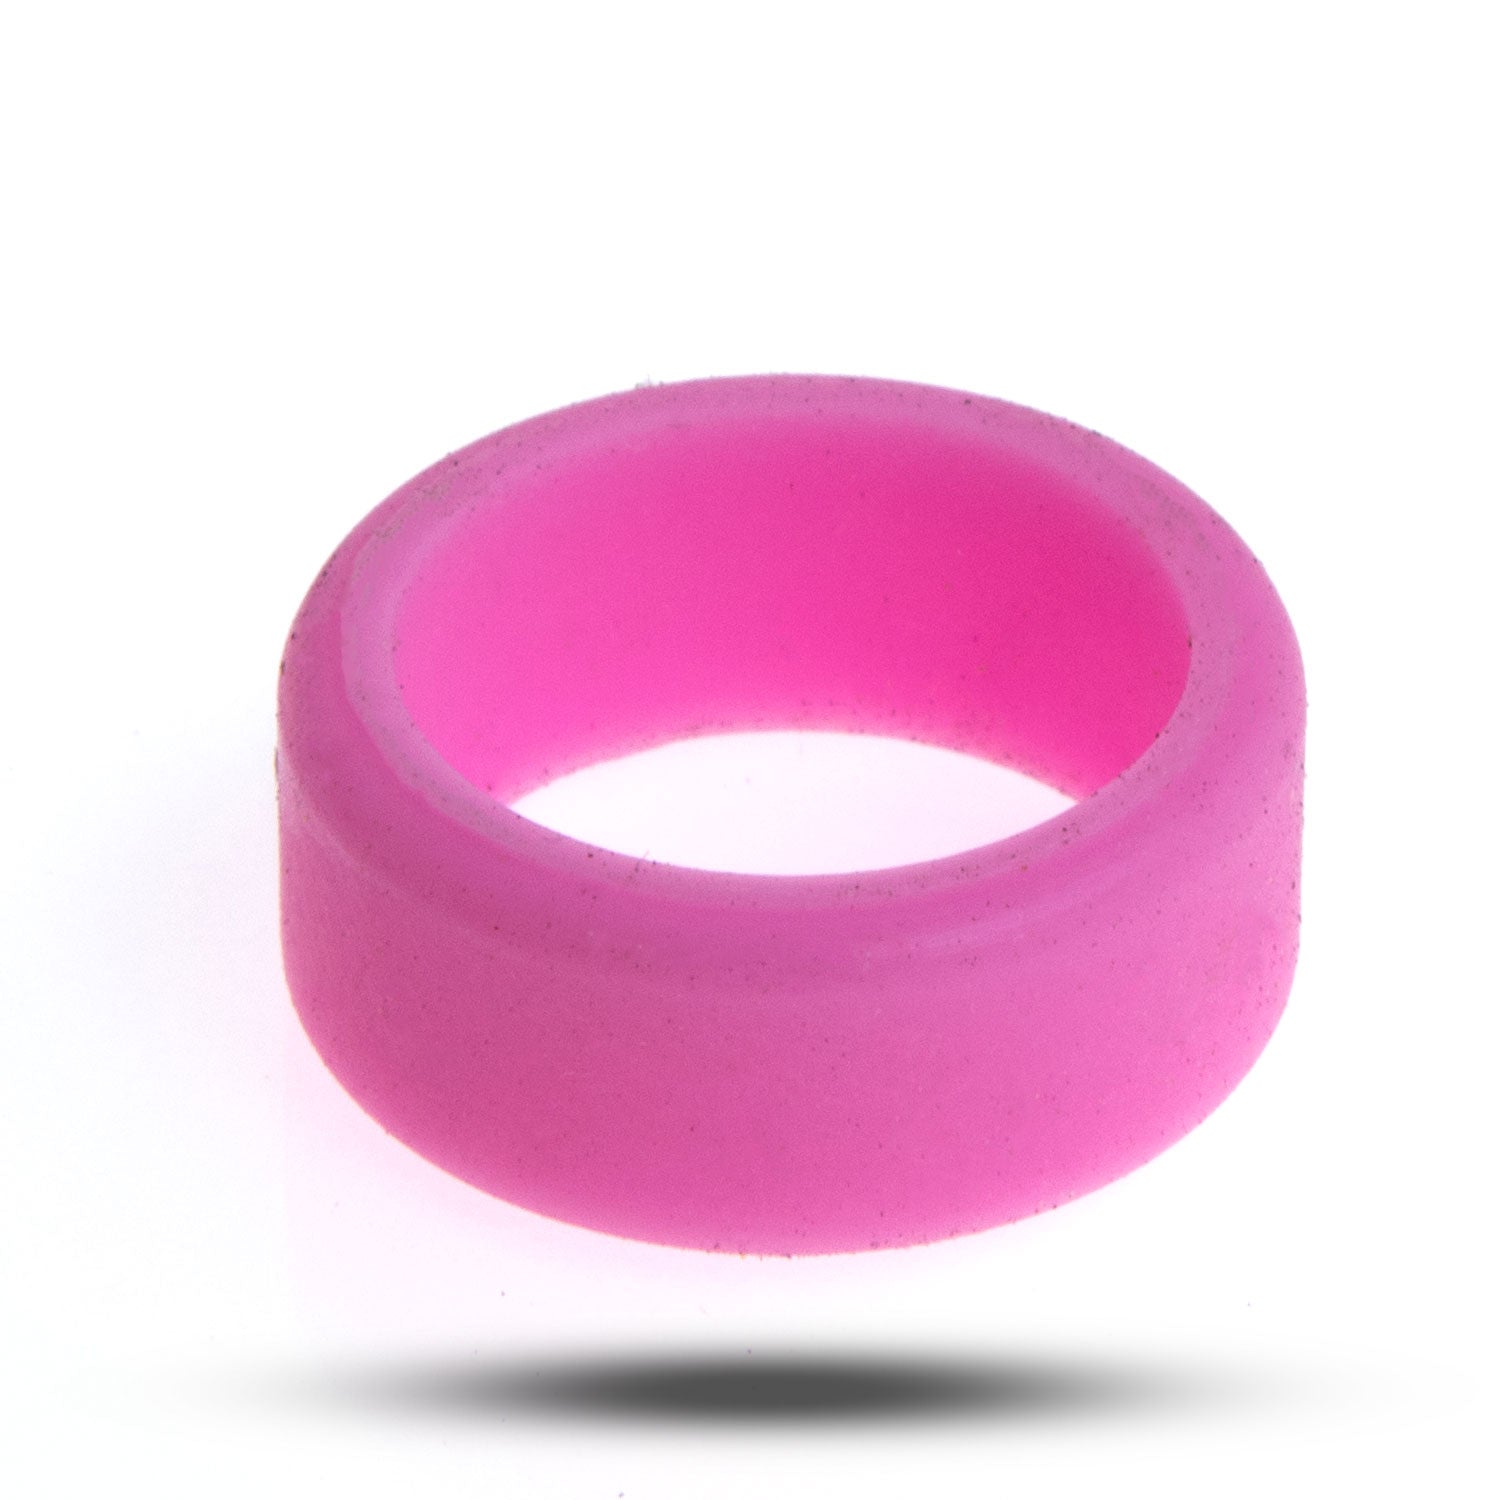 Grifiti Band Joes 1/4 1 x 0.25 Silicone Rubber Band Cord Ring Wrap